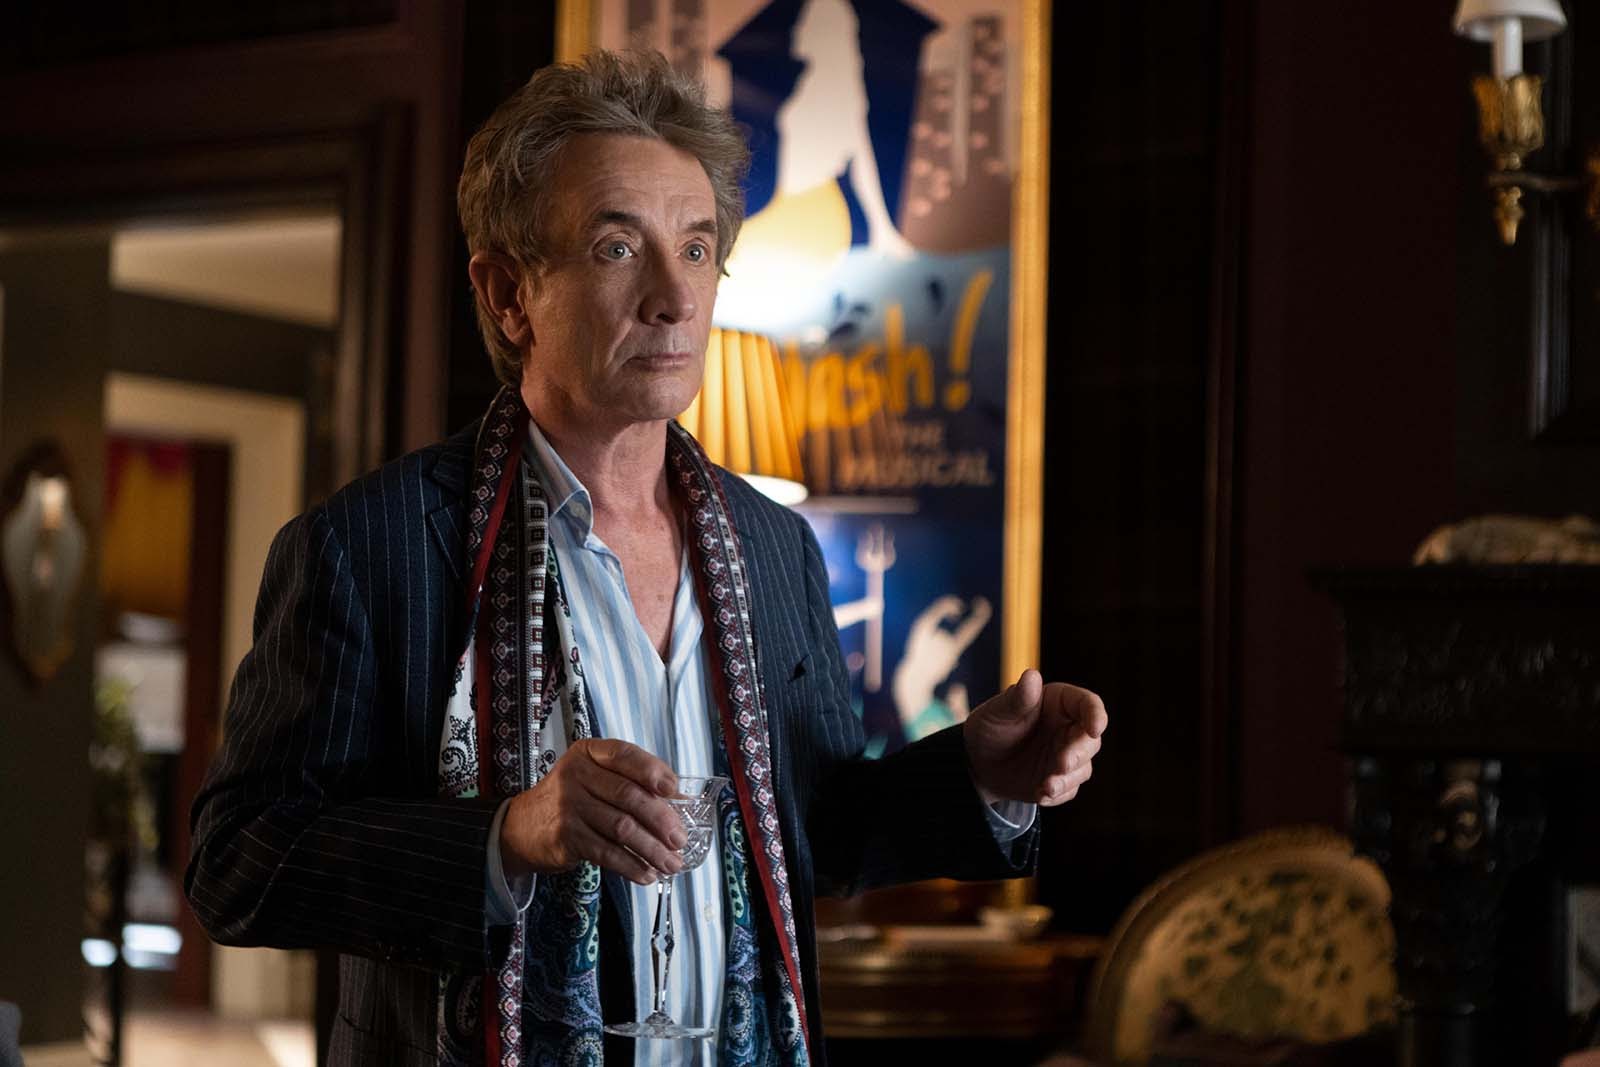 Martin Short plays Oliver Putnam, a struggling Broadway actor, in Only Murders in the Building. Image © Hulu